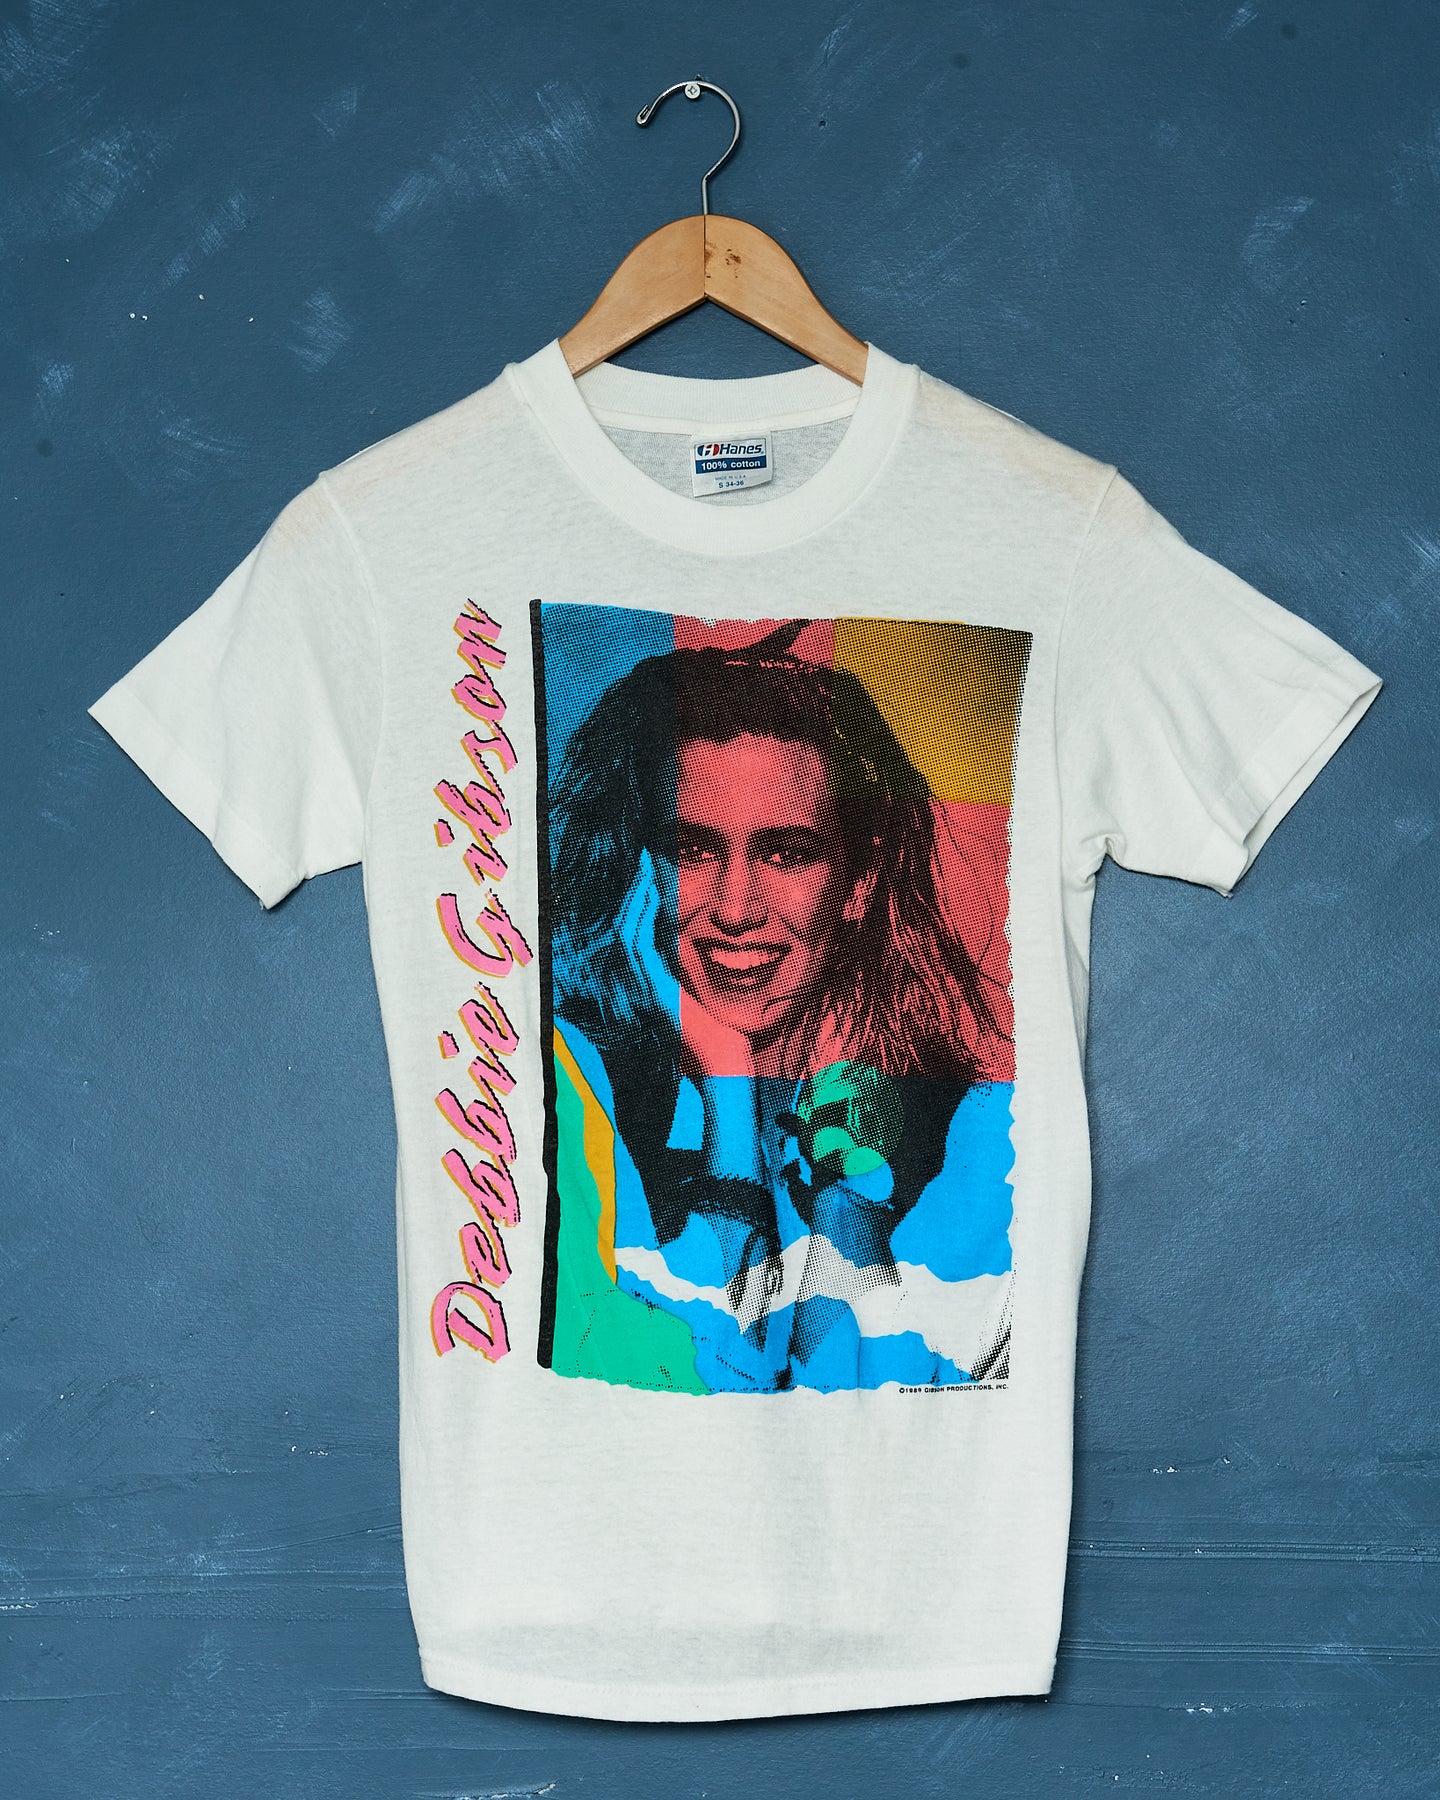 1989 Debbie Gibson Electric Youth Tour Tee